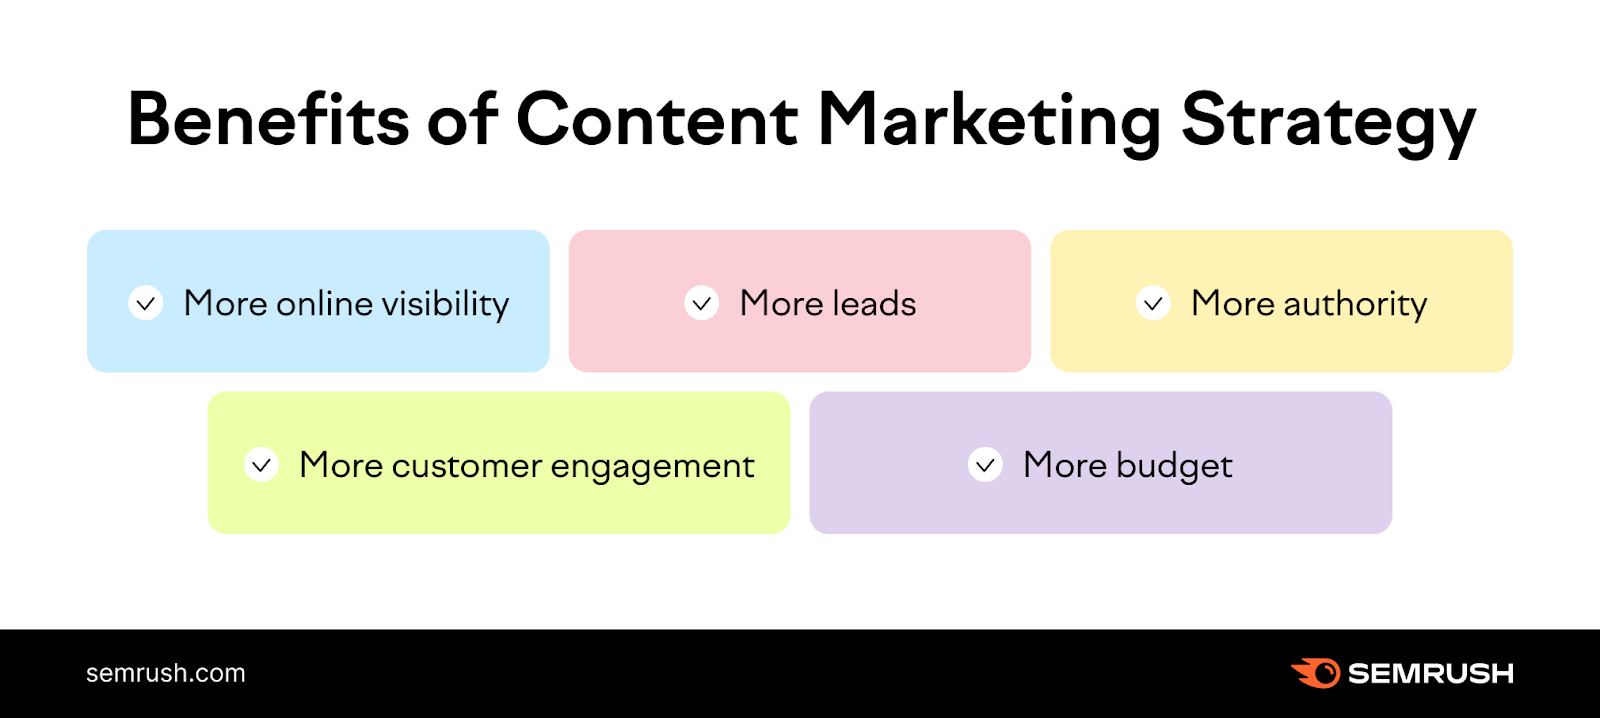 content marketing strategy benefits